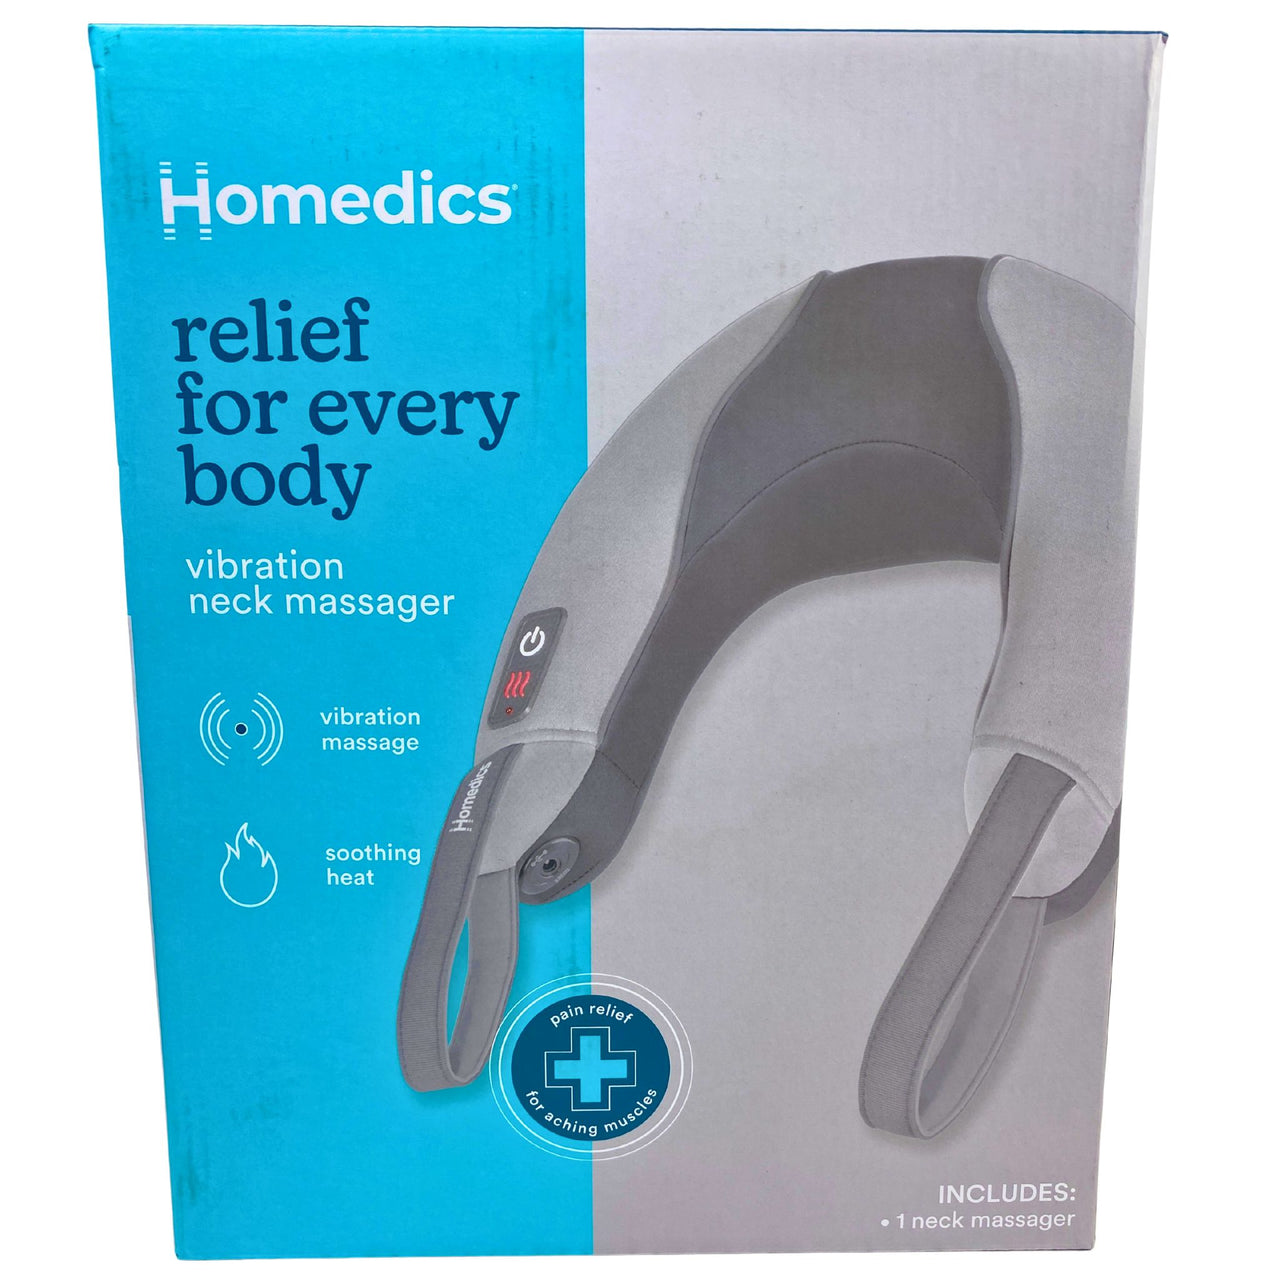 Homedics Relief for Every Body Vibration Neck Massager